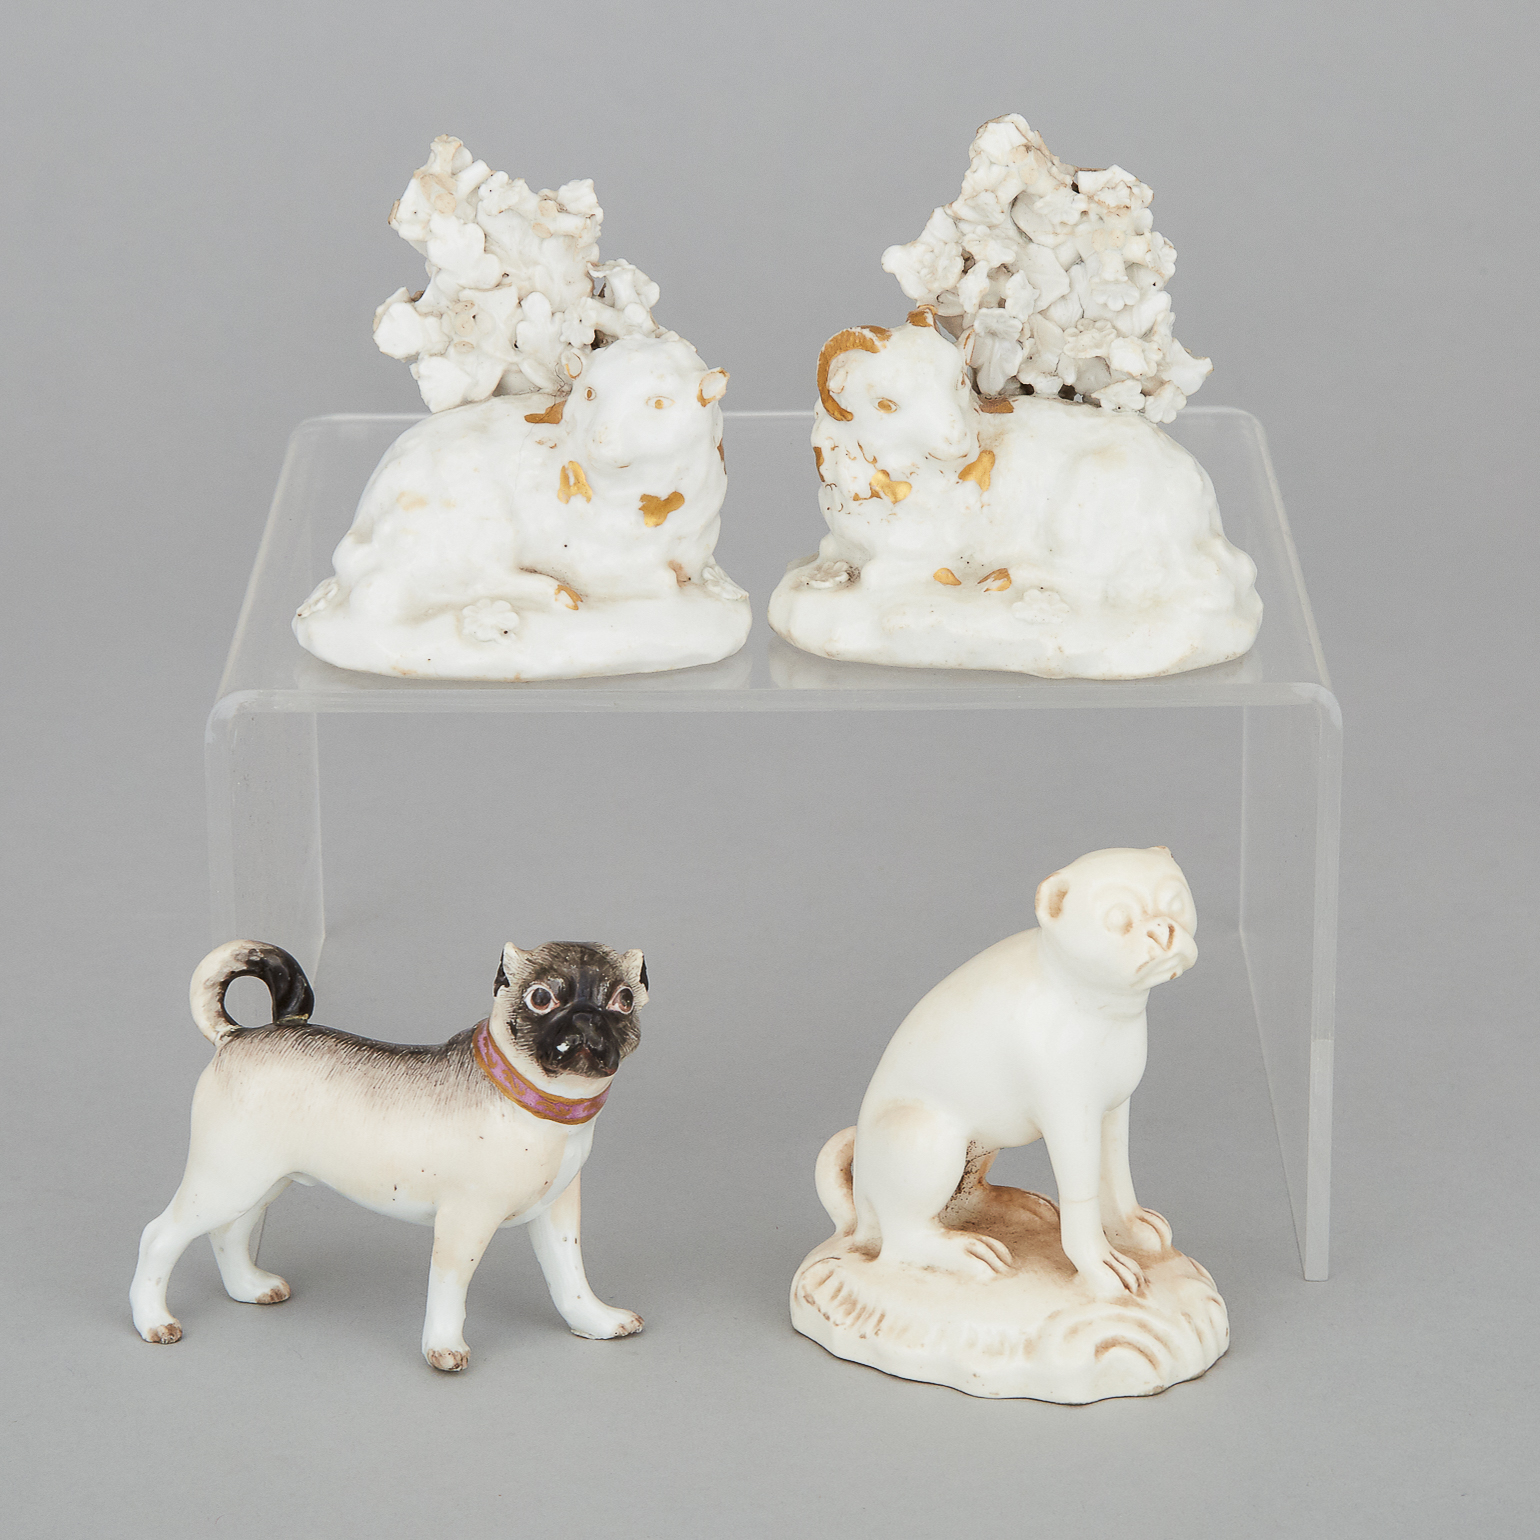 Pair of Derby Sheep, Seated Pug Dog and Another, probably Meissen, 18th/19th century